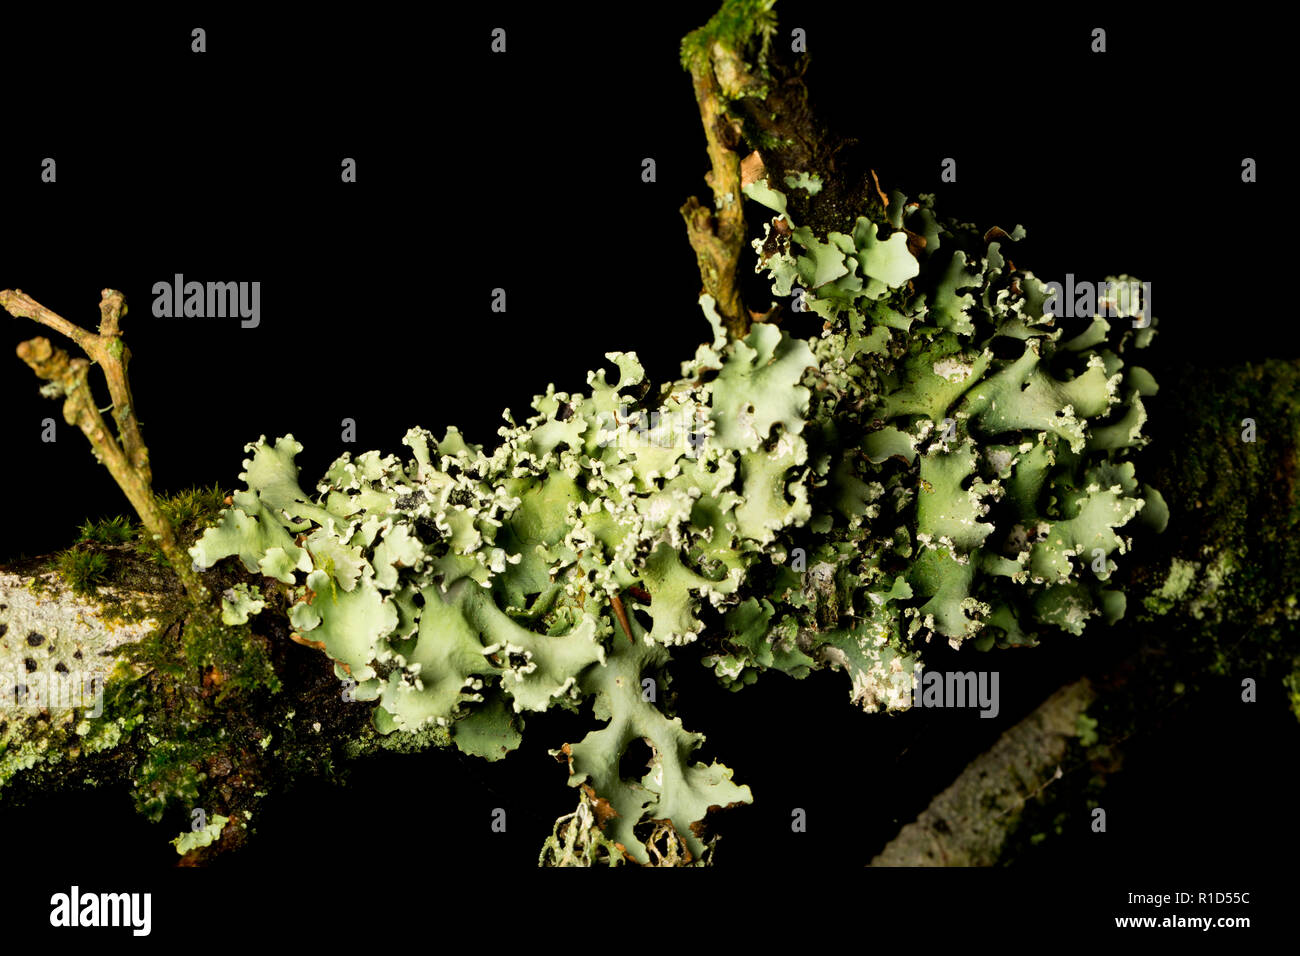 An example of Common Greenshield lichen, Flavoparmelia caperata, growing on an oak branch in the New Forest. Lichens are sensitive to air pollution. P Stock Photo